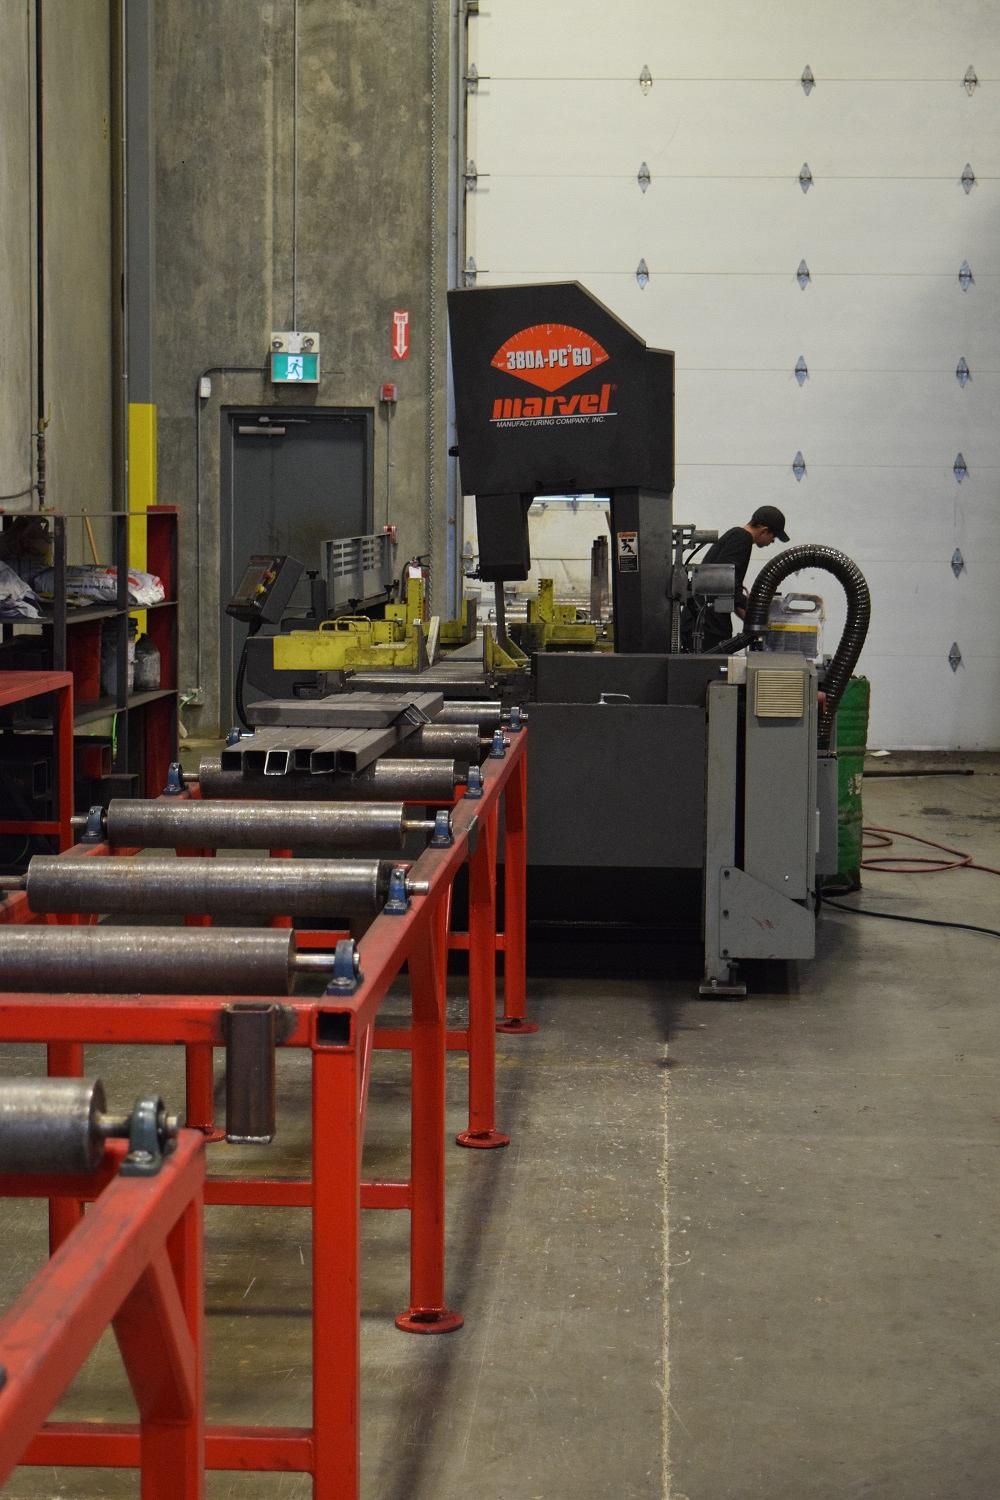 The Marvel 380A-PC3-60 band saw has sped up the processing of structural steel on the shop floor. 